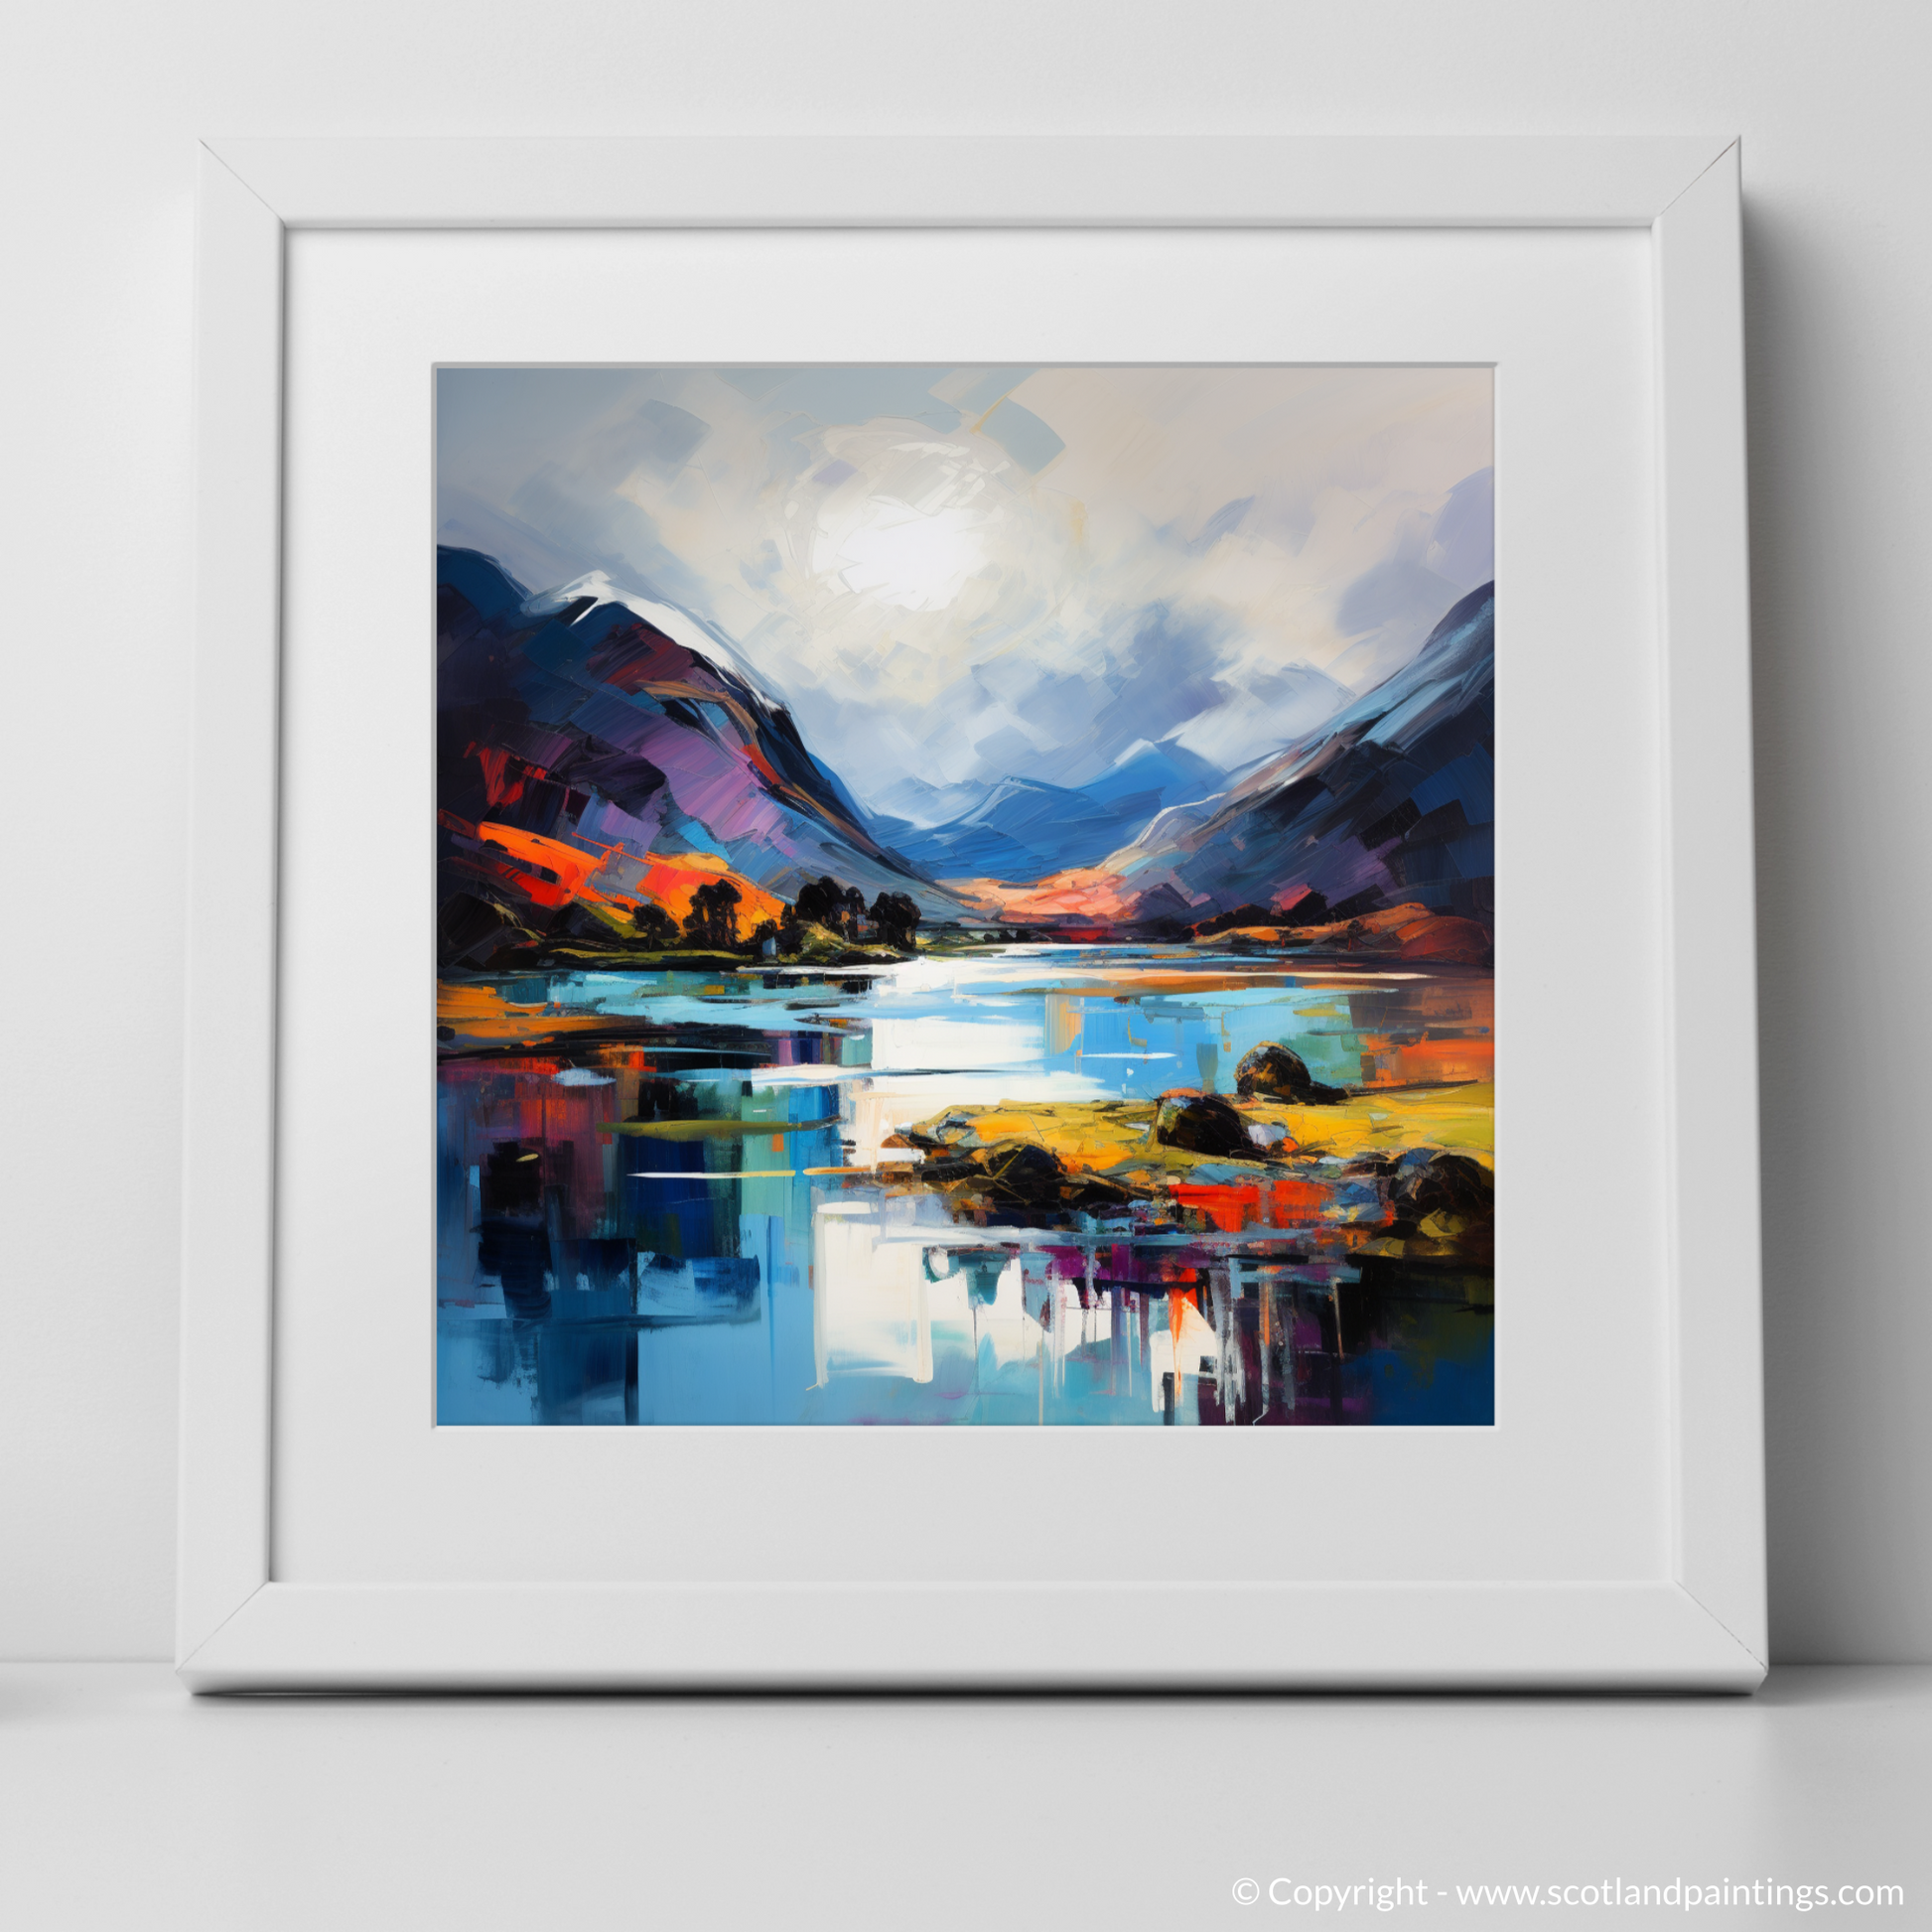 Art Print of Loch Shiel, Highlands with a white frame